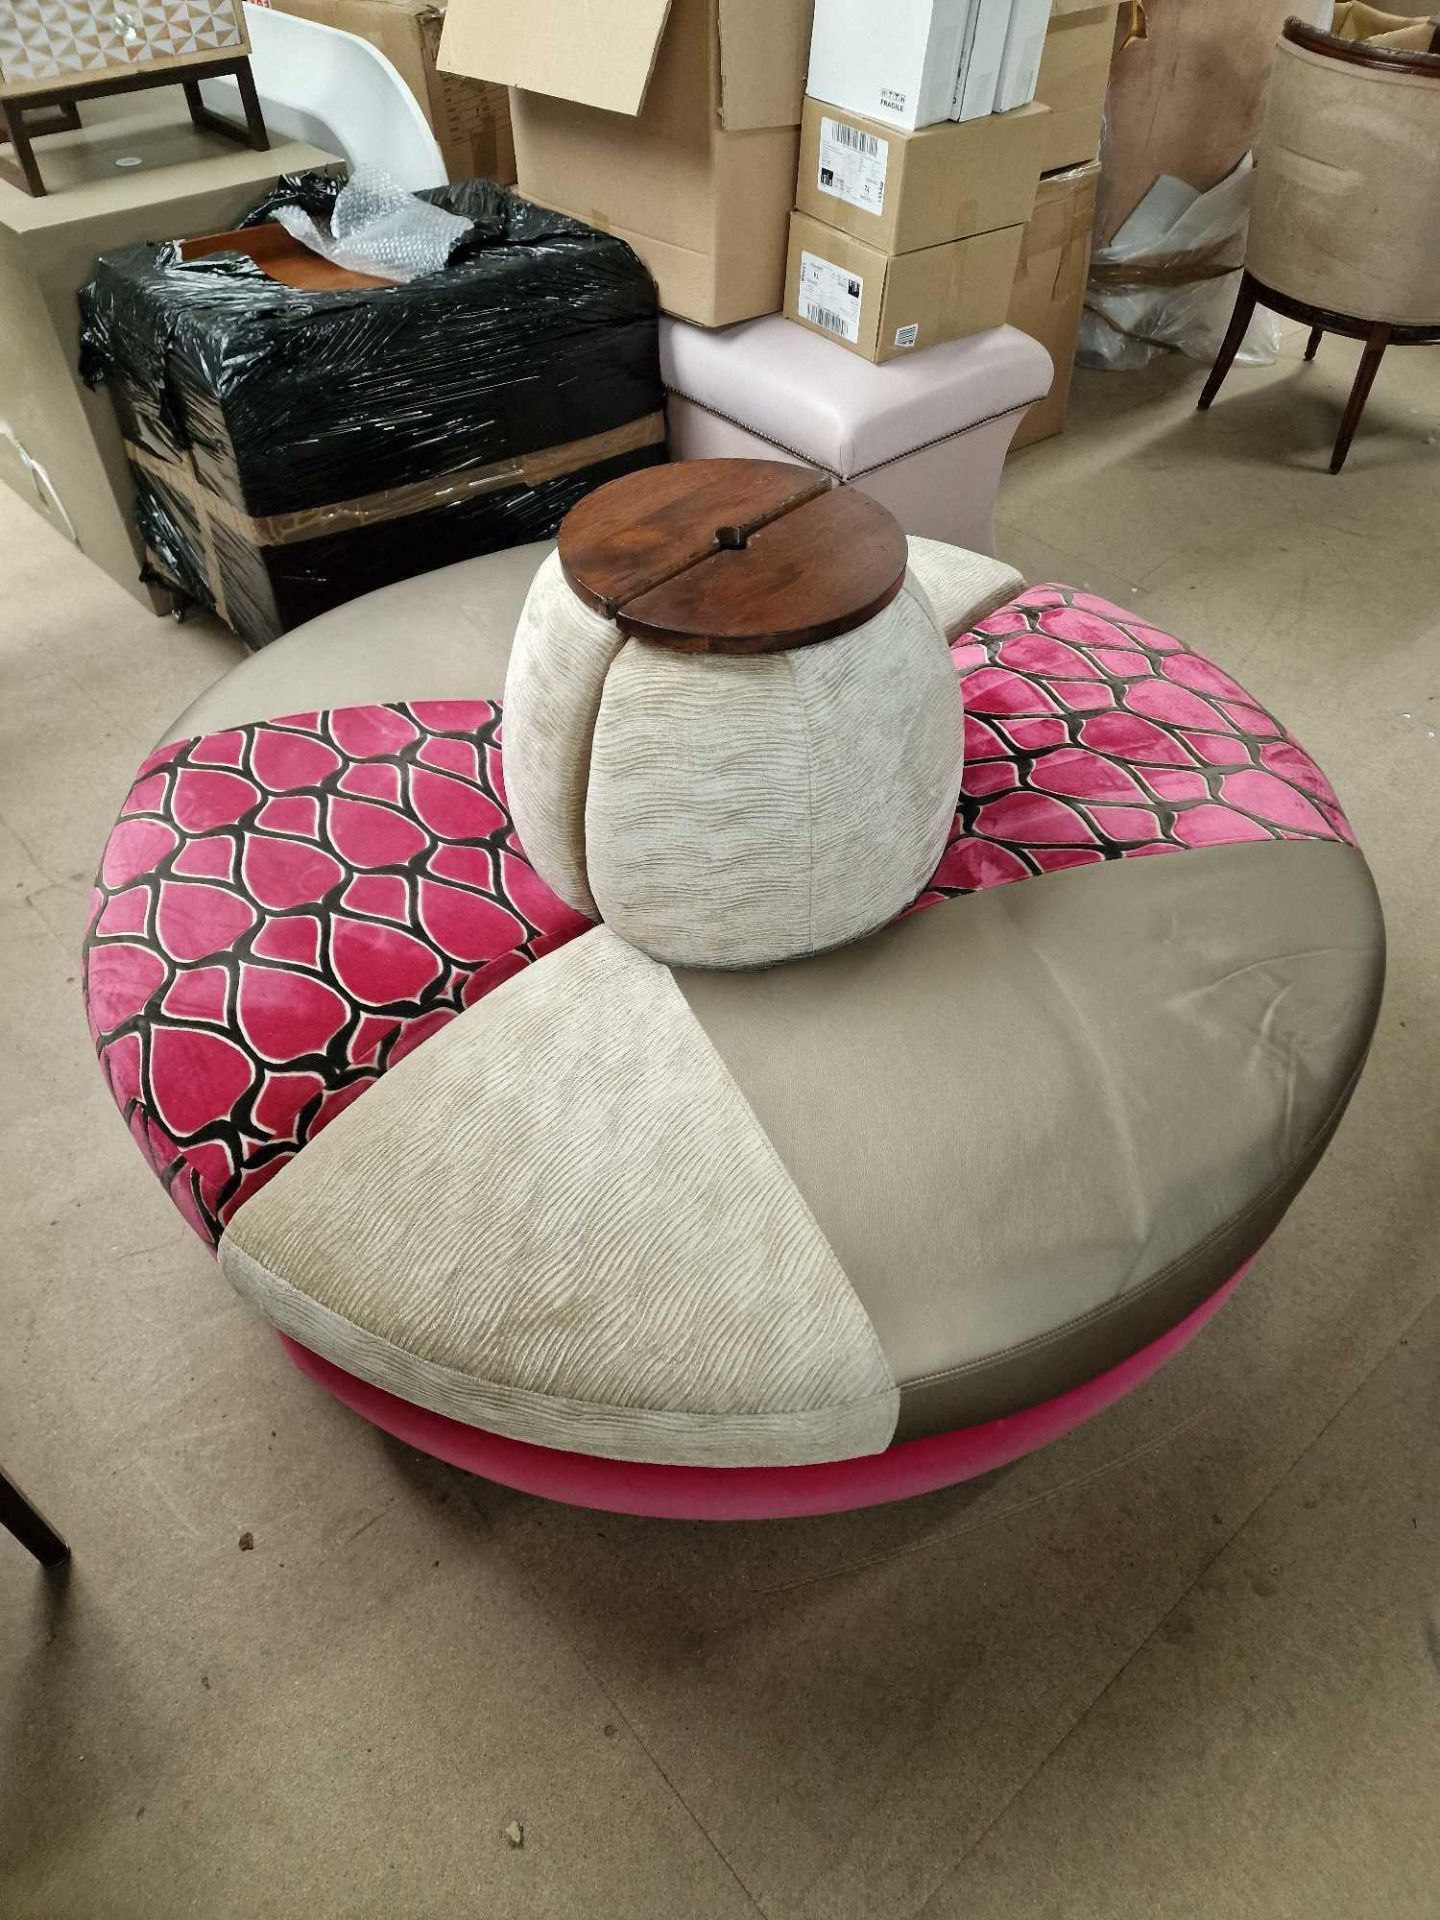 2 x Circular Banquet Sofas Upholstered In A Mix Of Leather And Fabric Pink Beige And Gold On Solid - Bild 3 aus 4